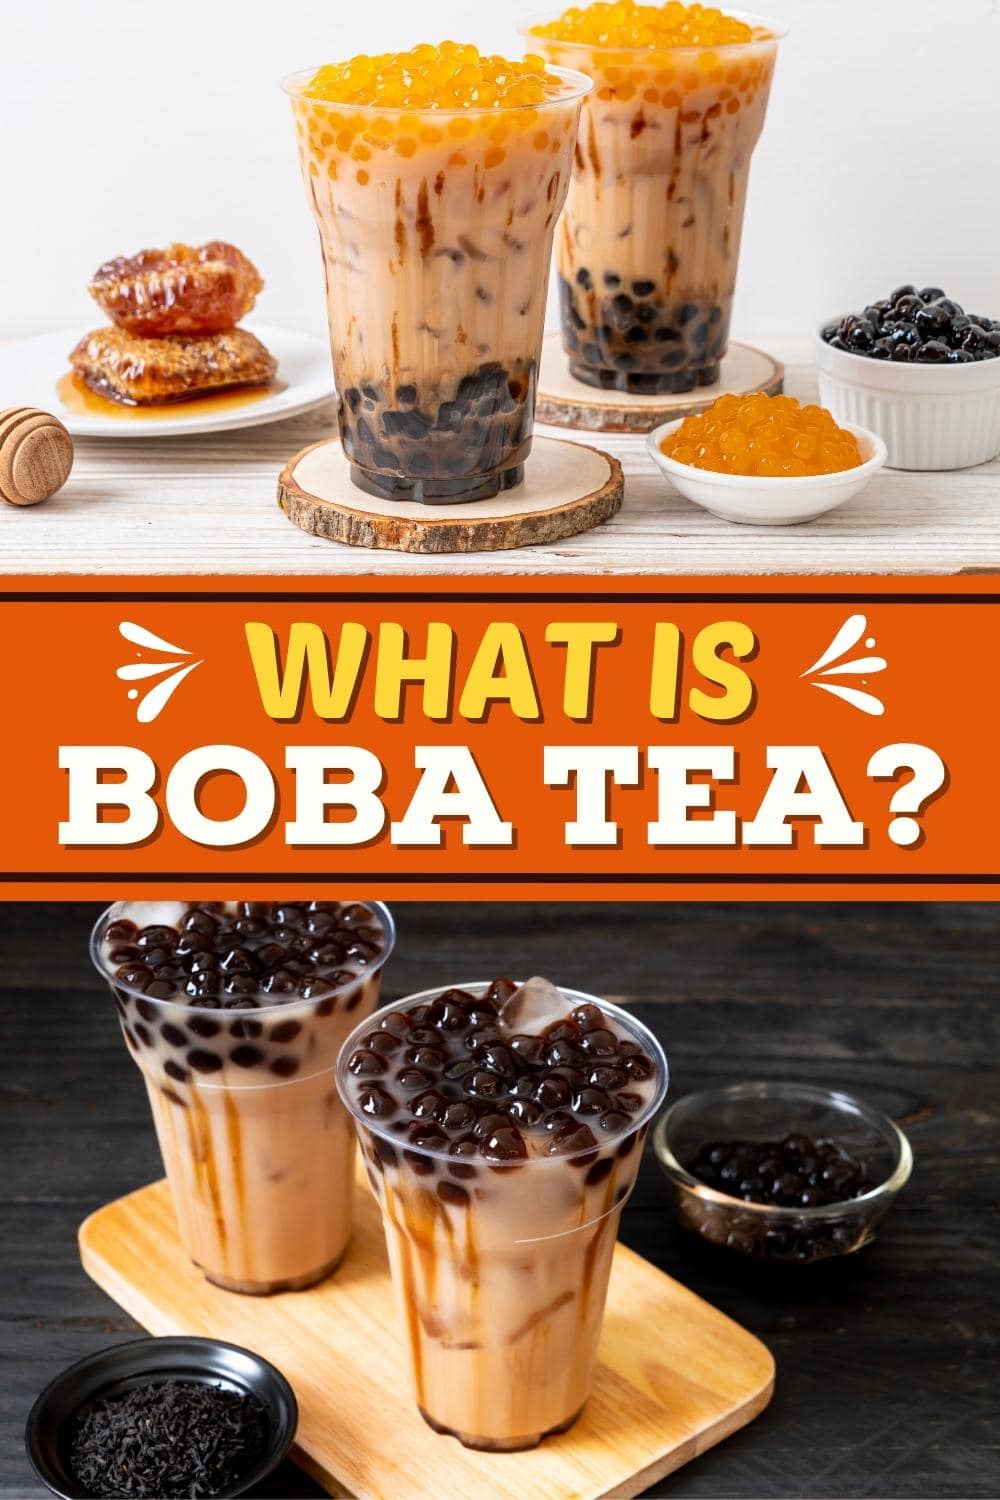 What Is Boba Tea?